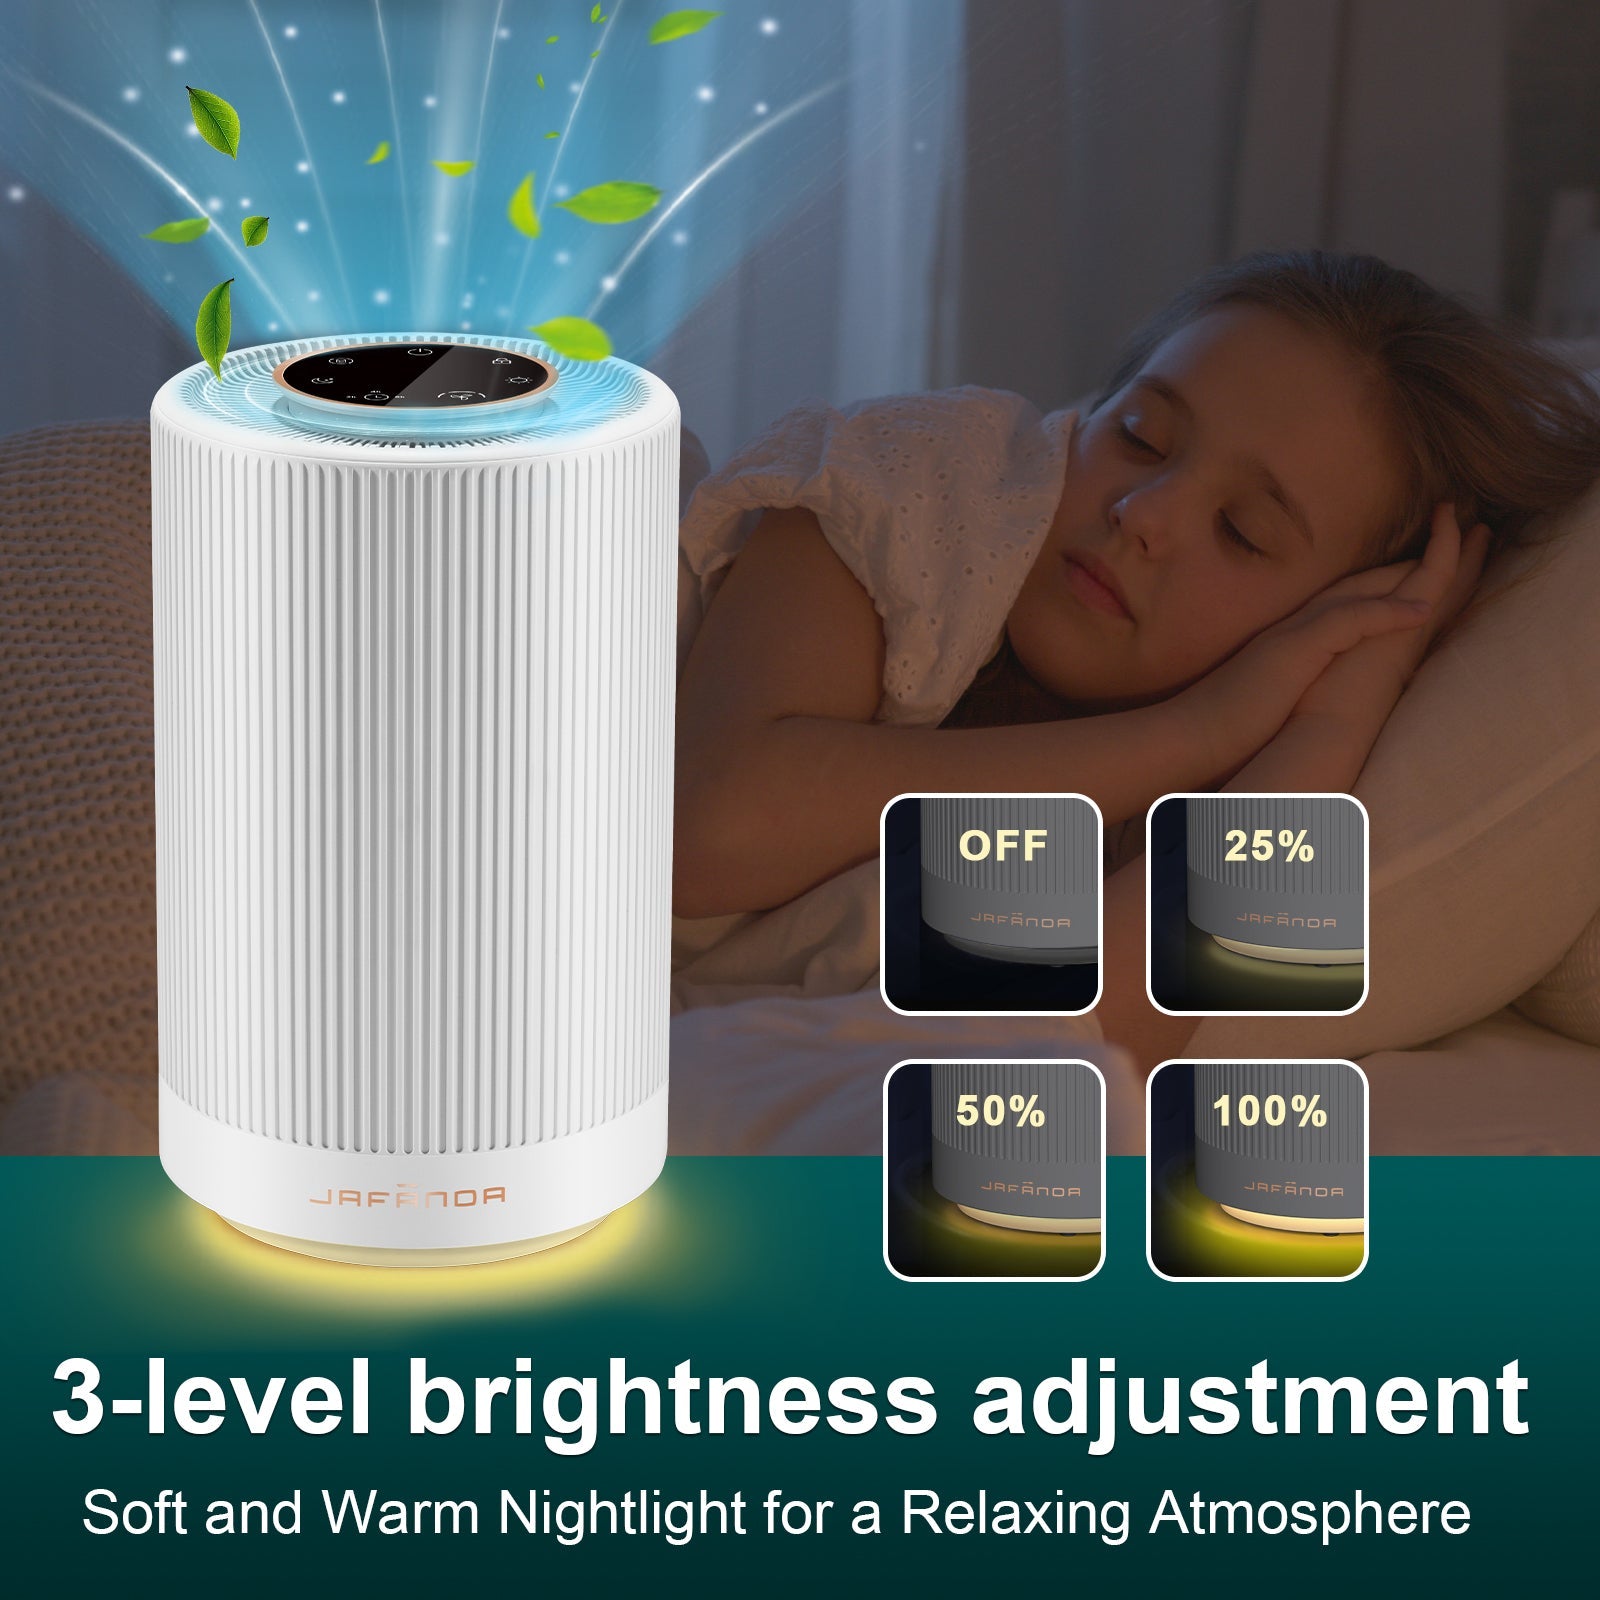 Jafanda Air Purifier for Home Bedroom Up to 450 sq ft, with H13 HEPA Air Filter, 22dB Quiet Sleep Mode, Air Cleaner Eliminates Allergens, Smoke, Dust, Mold, Pet Dander, Pollen - Night Light - Jafanda